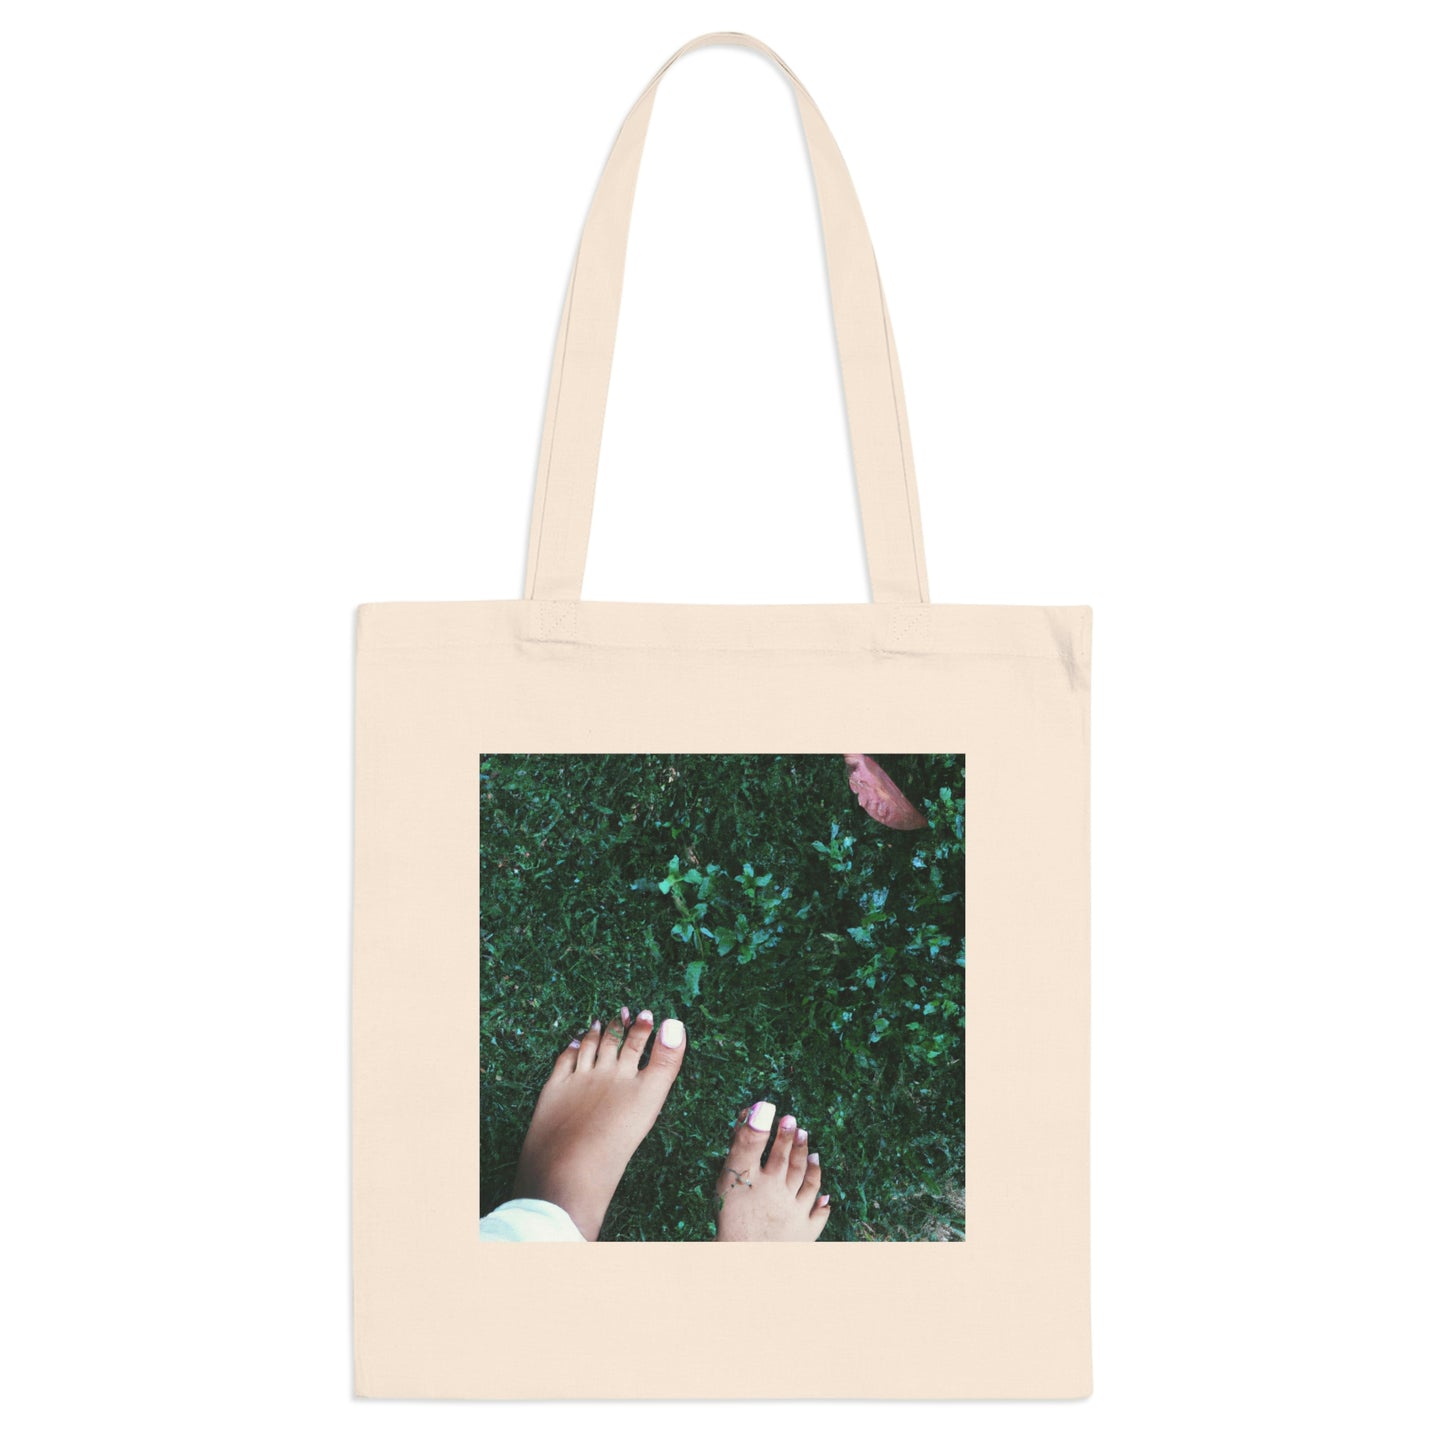 "The Universe of Opportunity" - The Alien Tote Bag